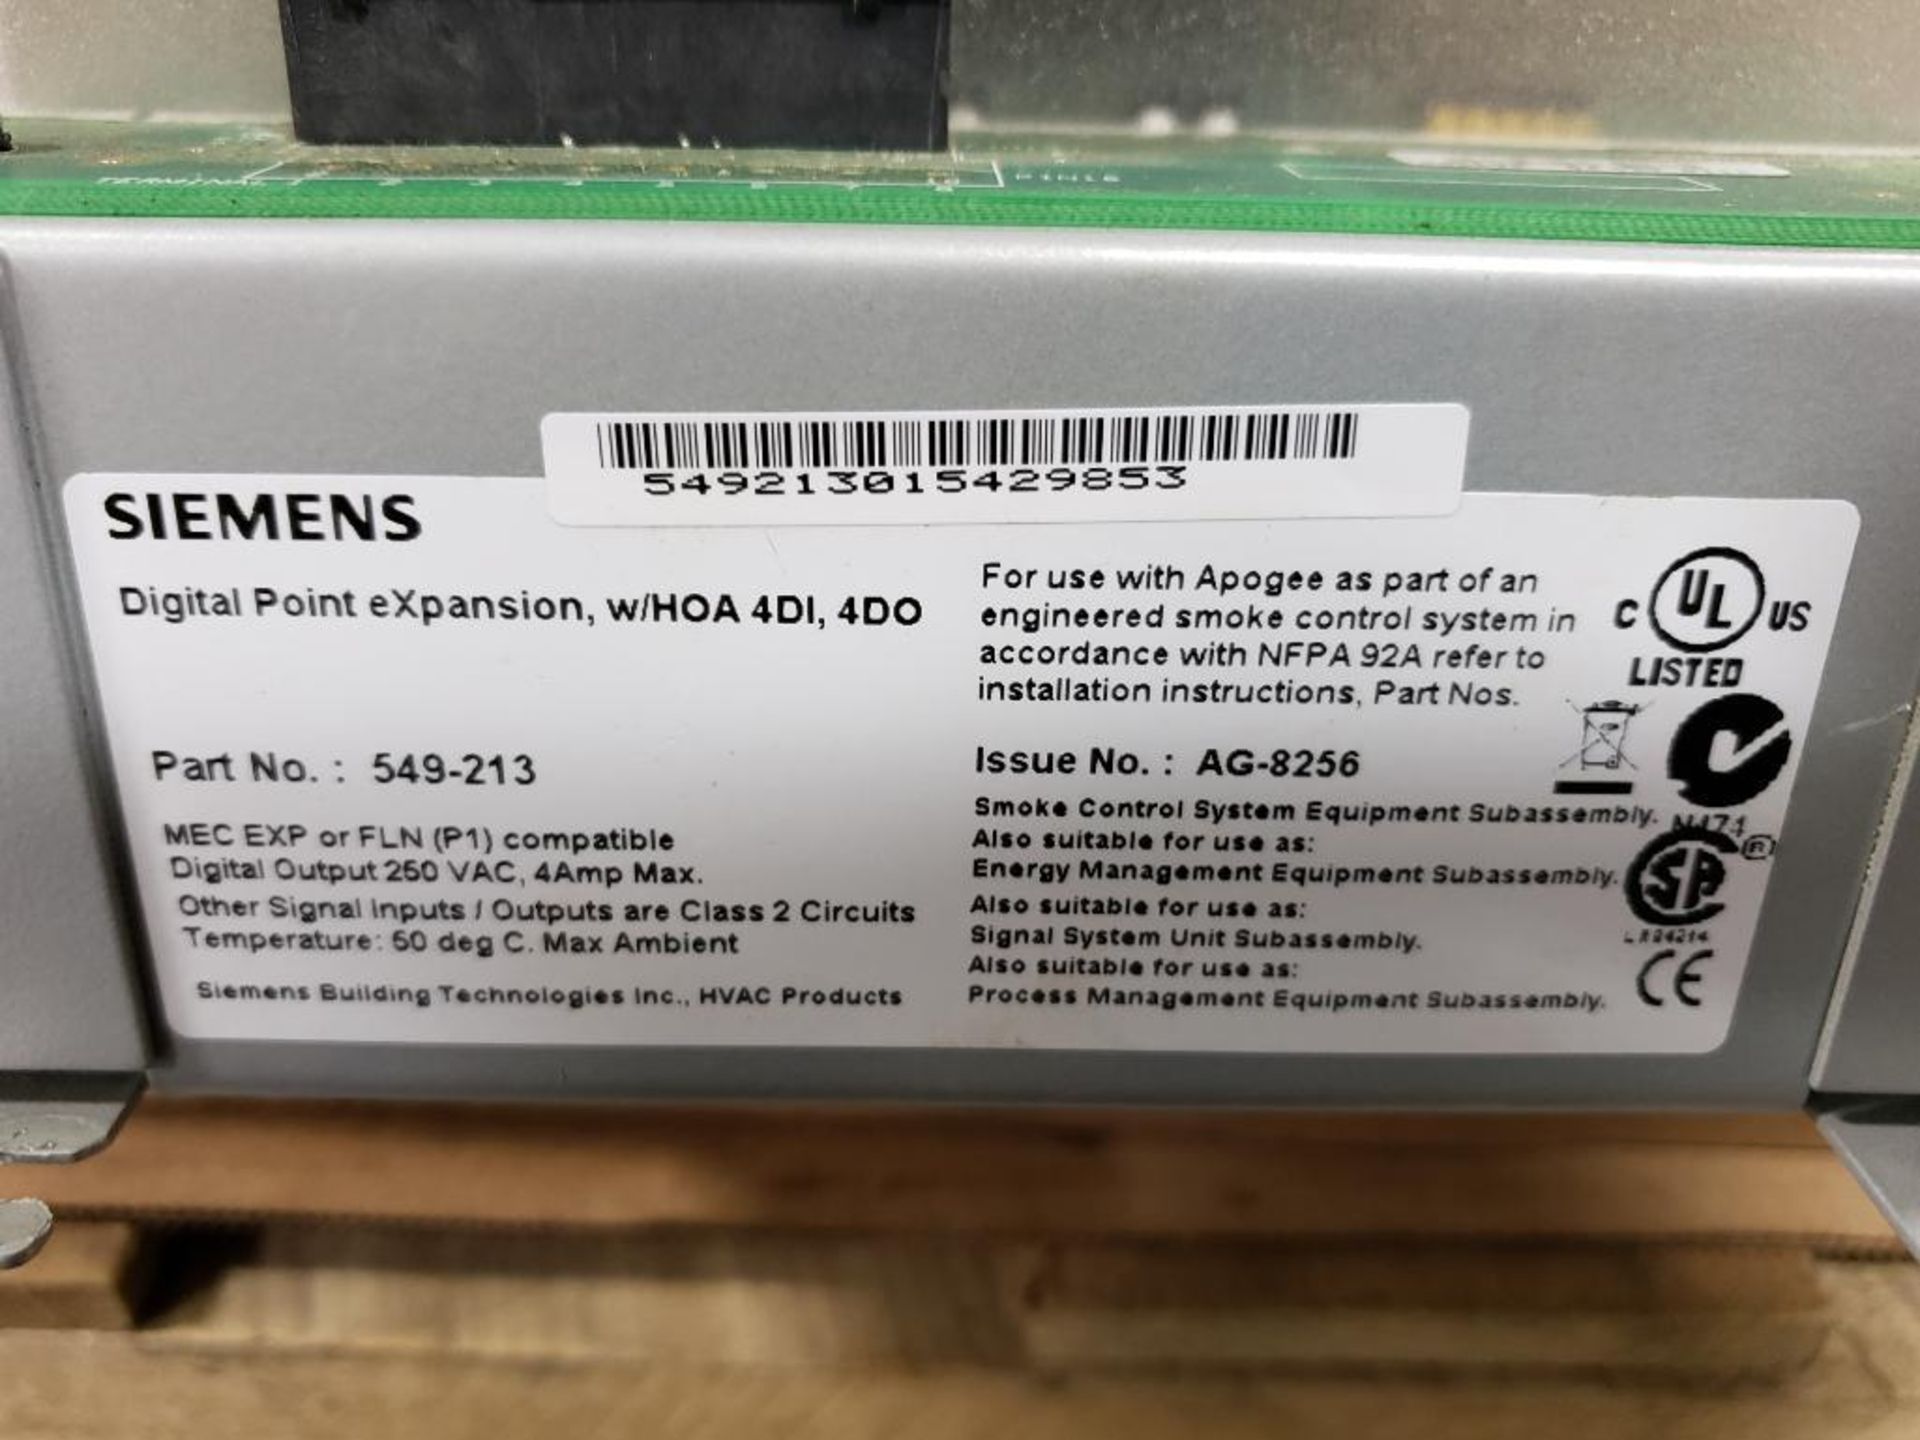 Qty 2 - Siemens Apogee digital point expansion part number 549-223. - Image 3 of 3